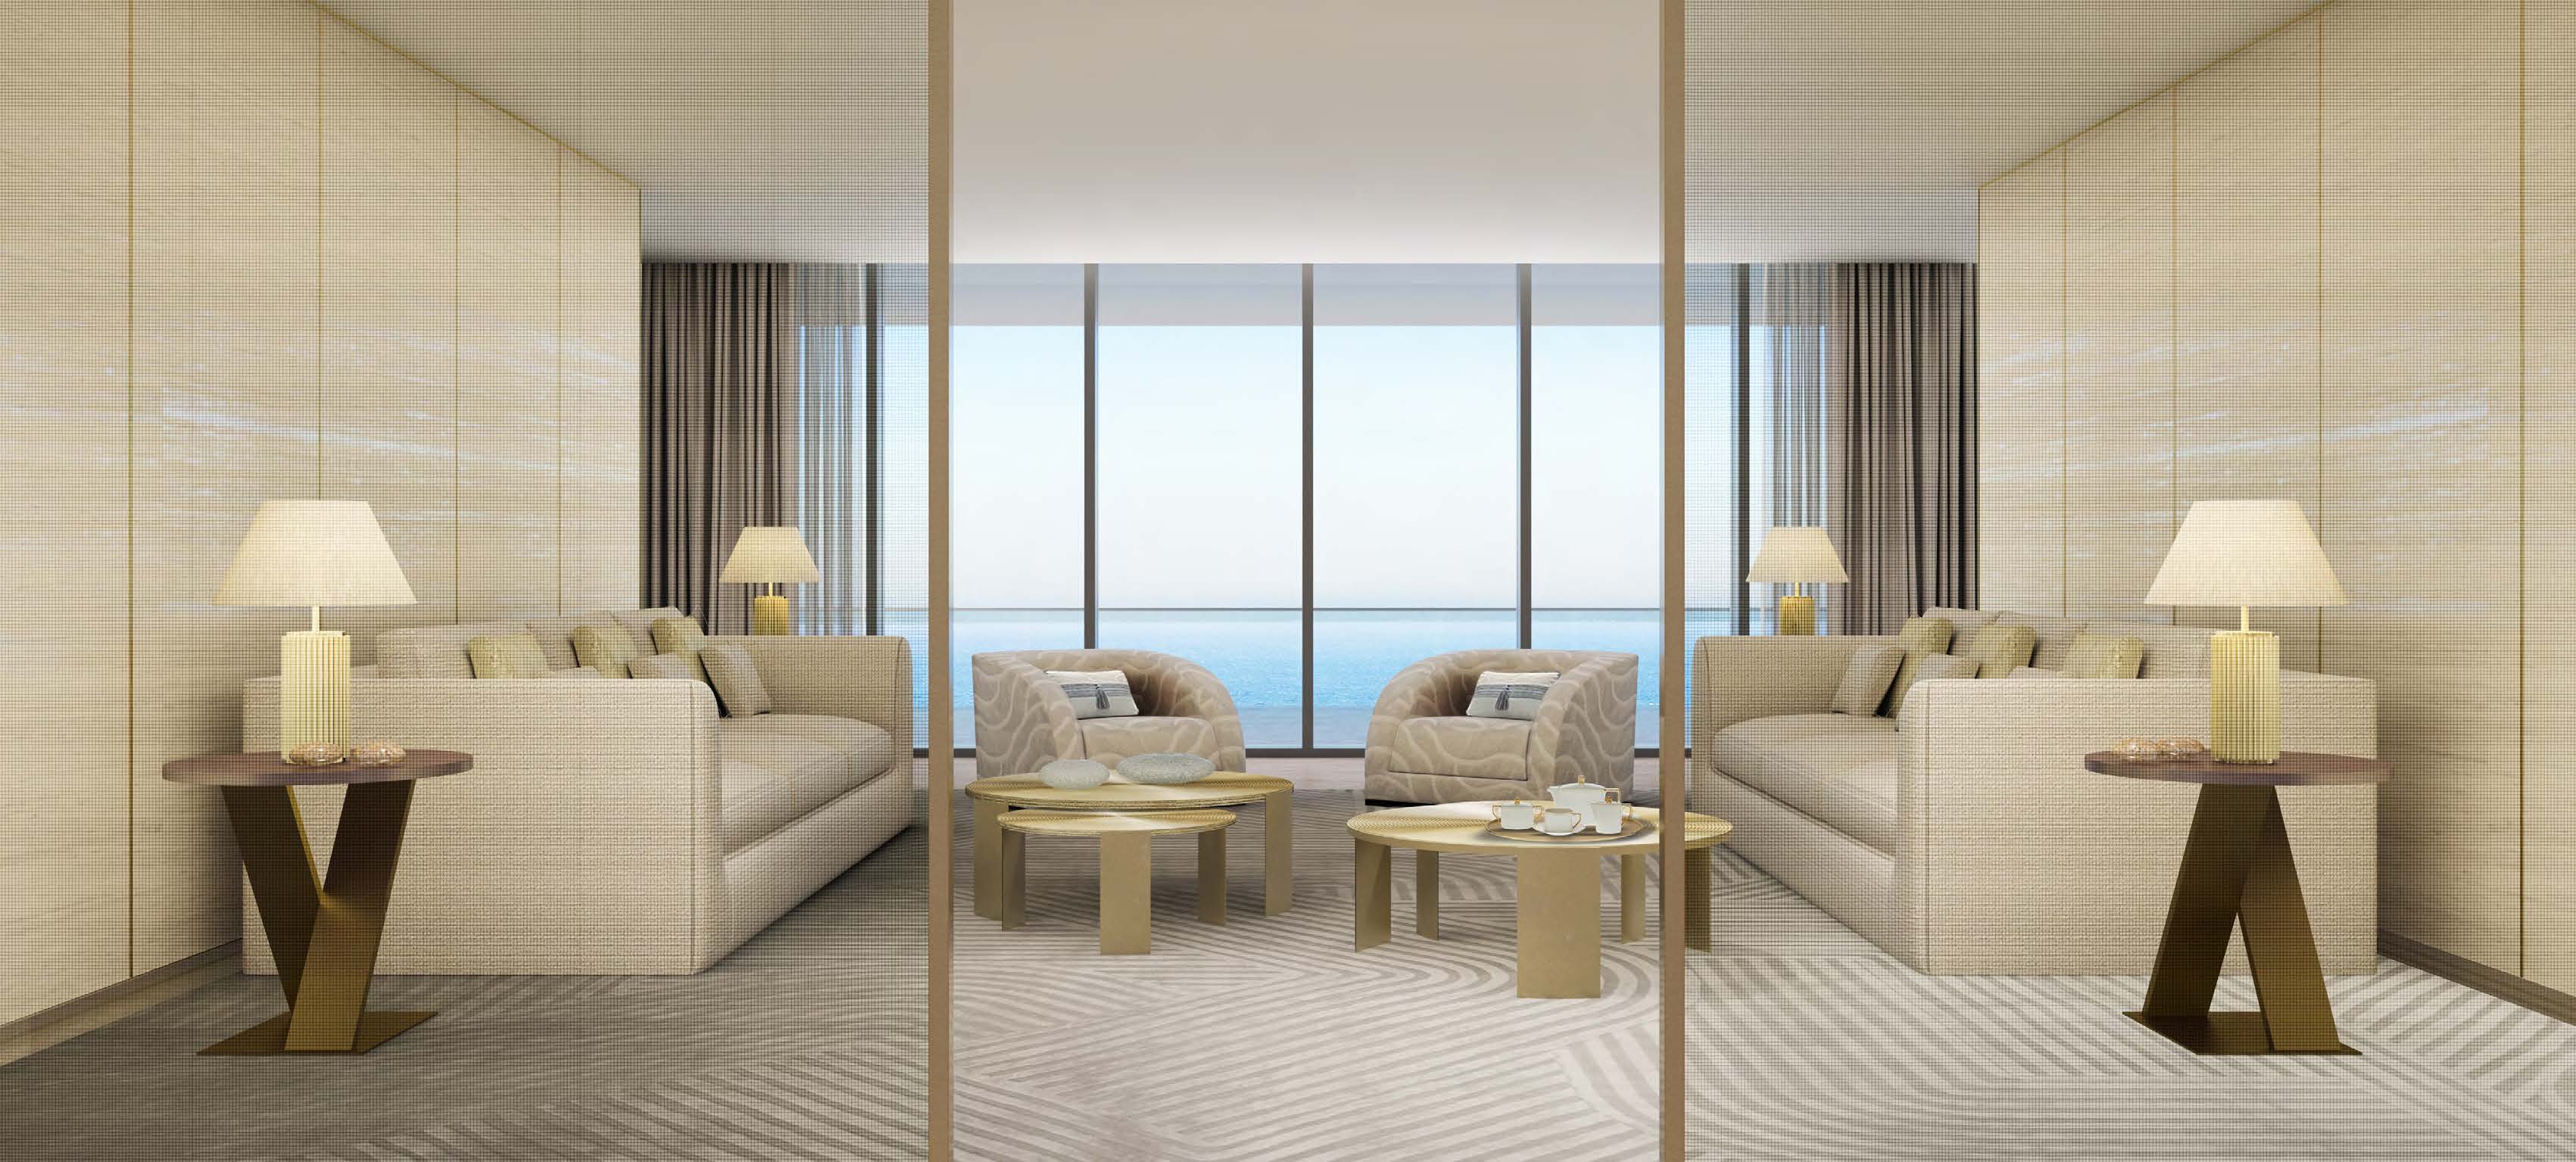 latest-project-in-dubai-armani-beach-residences-for-sale-in-palm-jumeirah